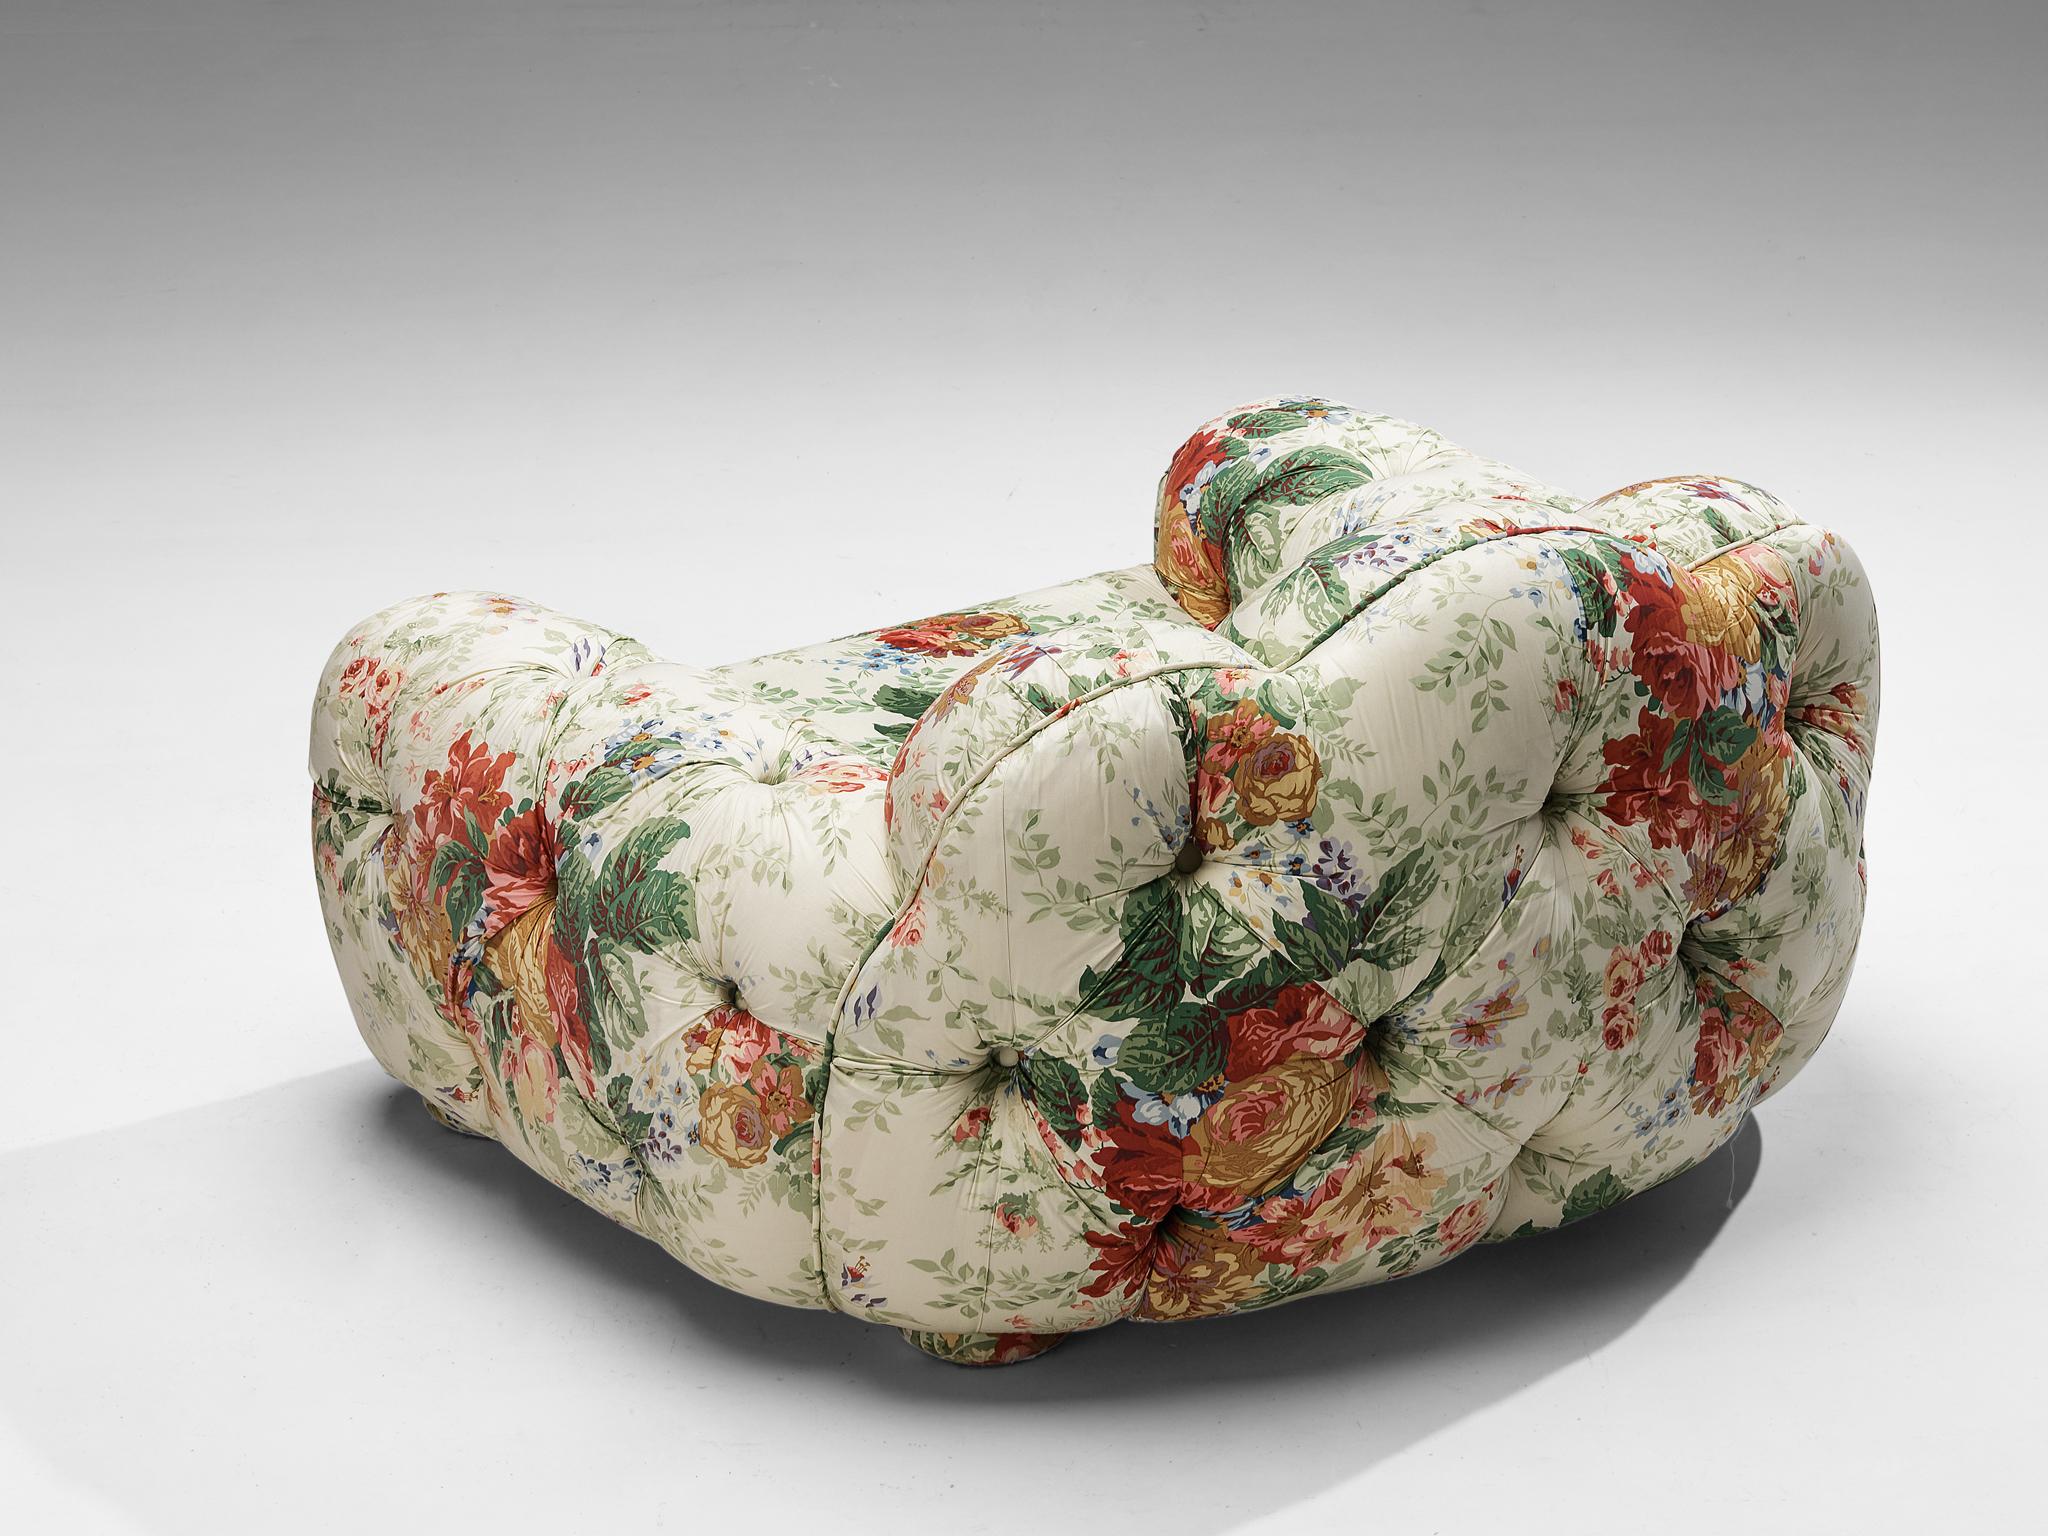 Vivai Del Sud 'Superstar' Lounge Chair in Floral Upholstery 3